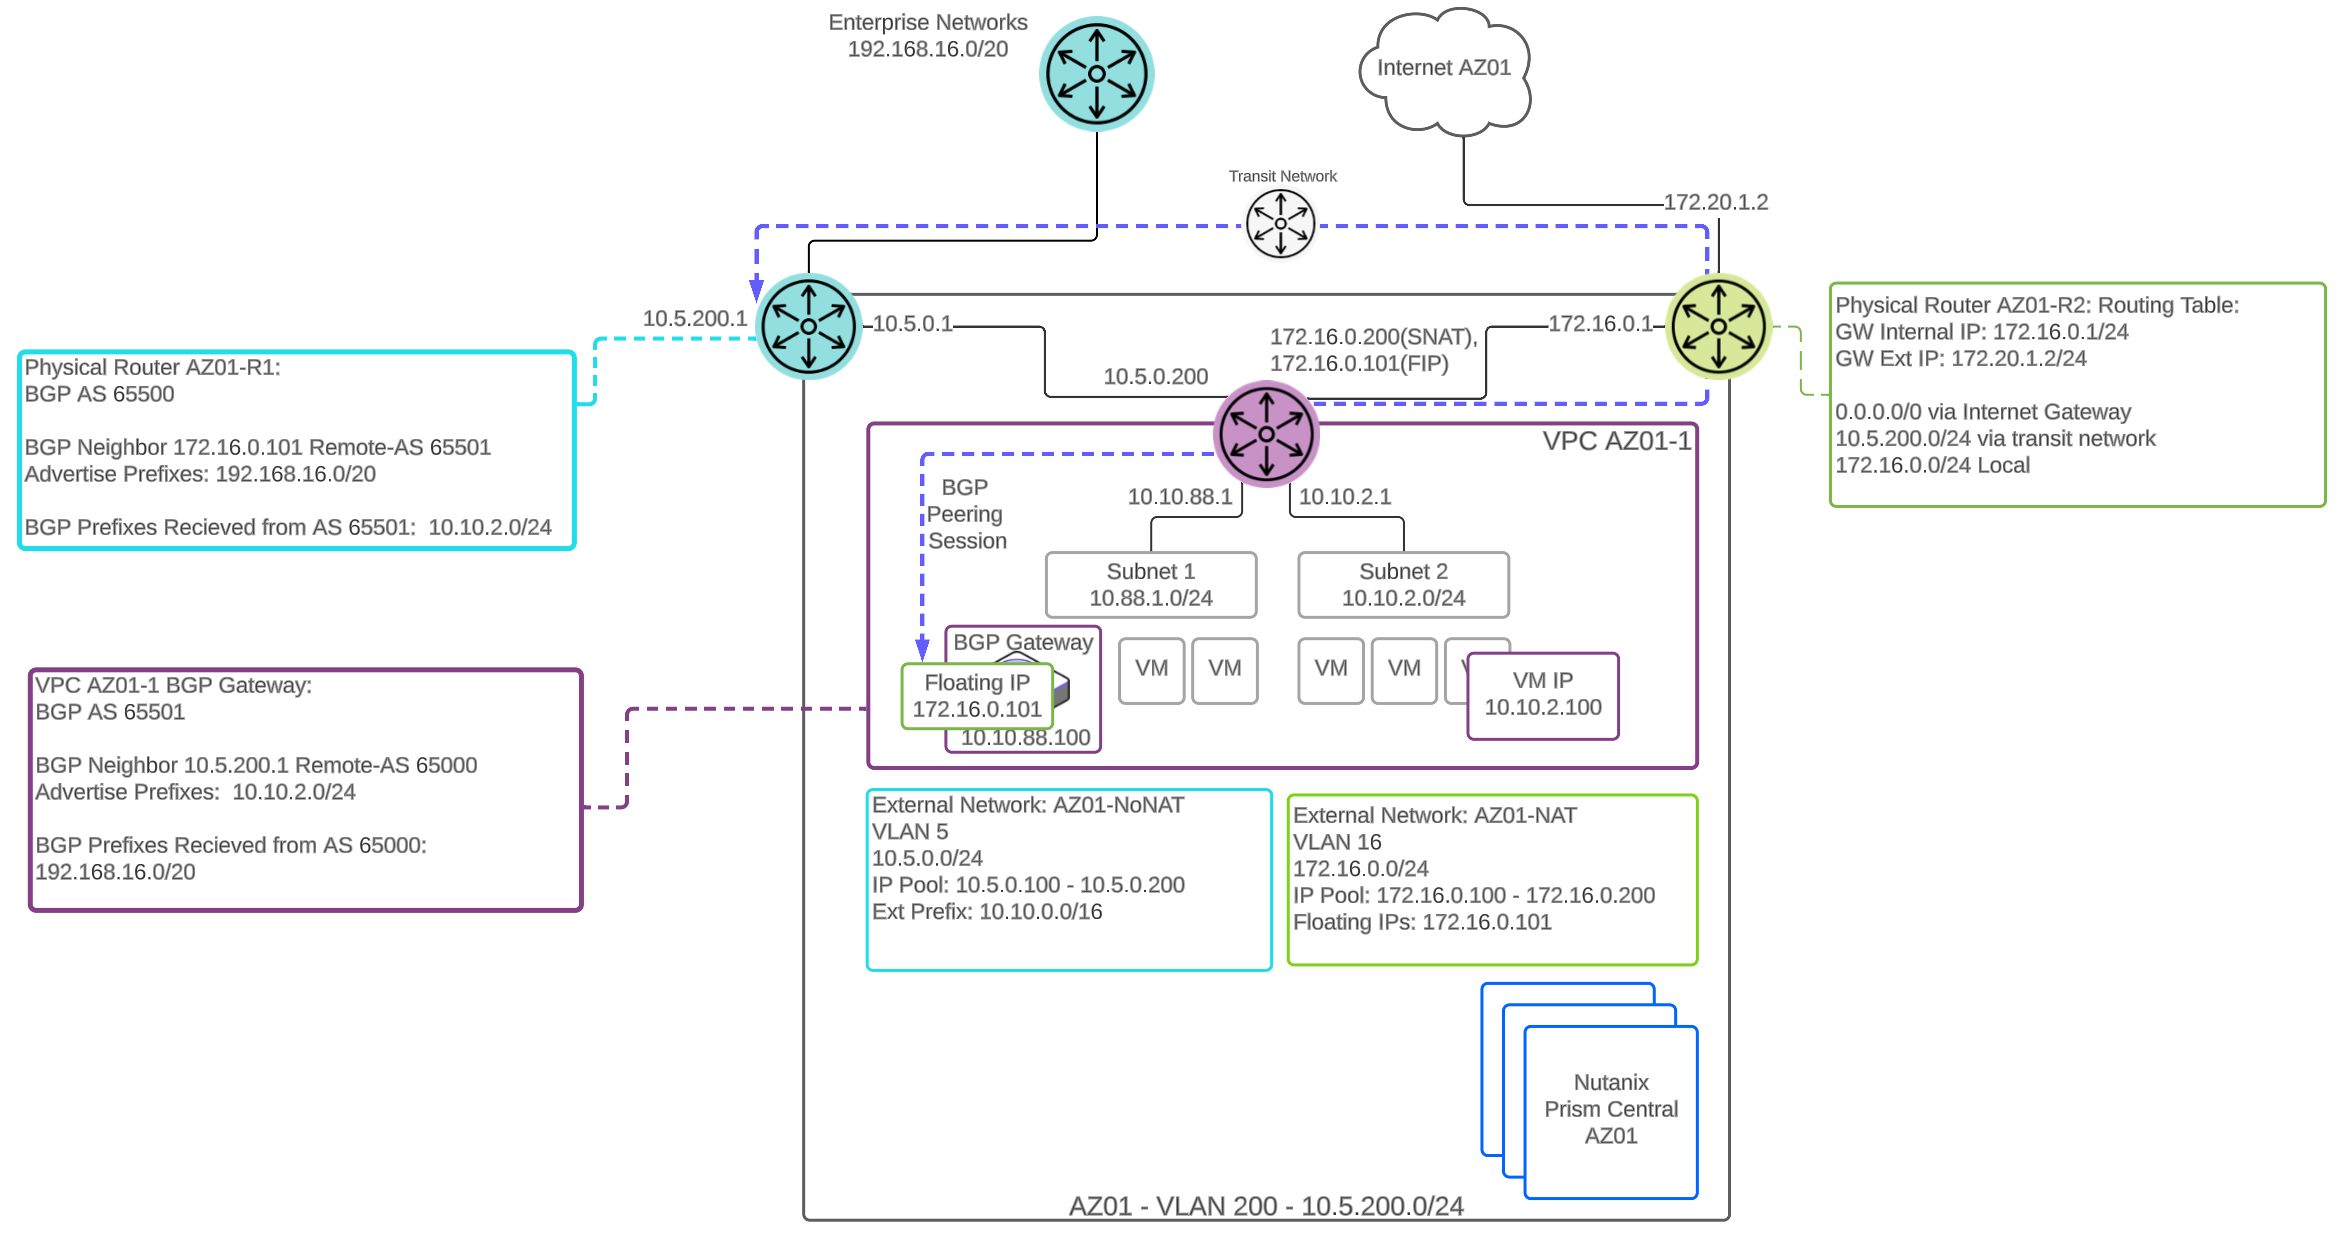 Flow Virtual Networking - BGP Gateway deployed in an overlay subnet